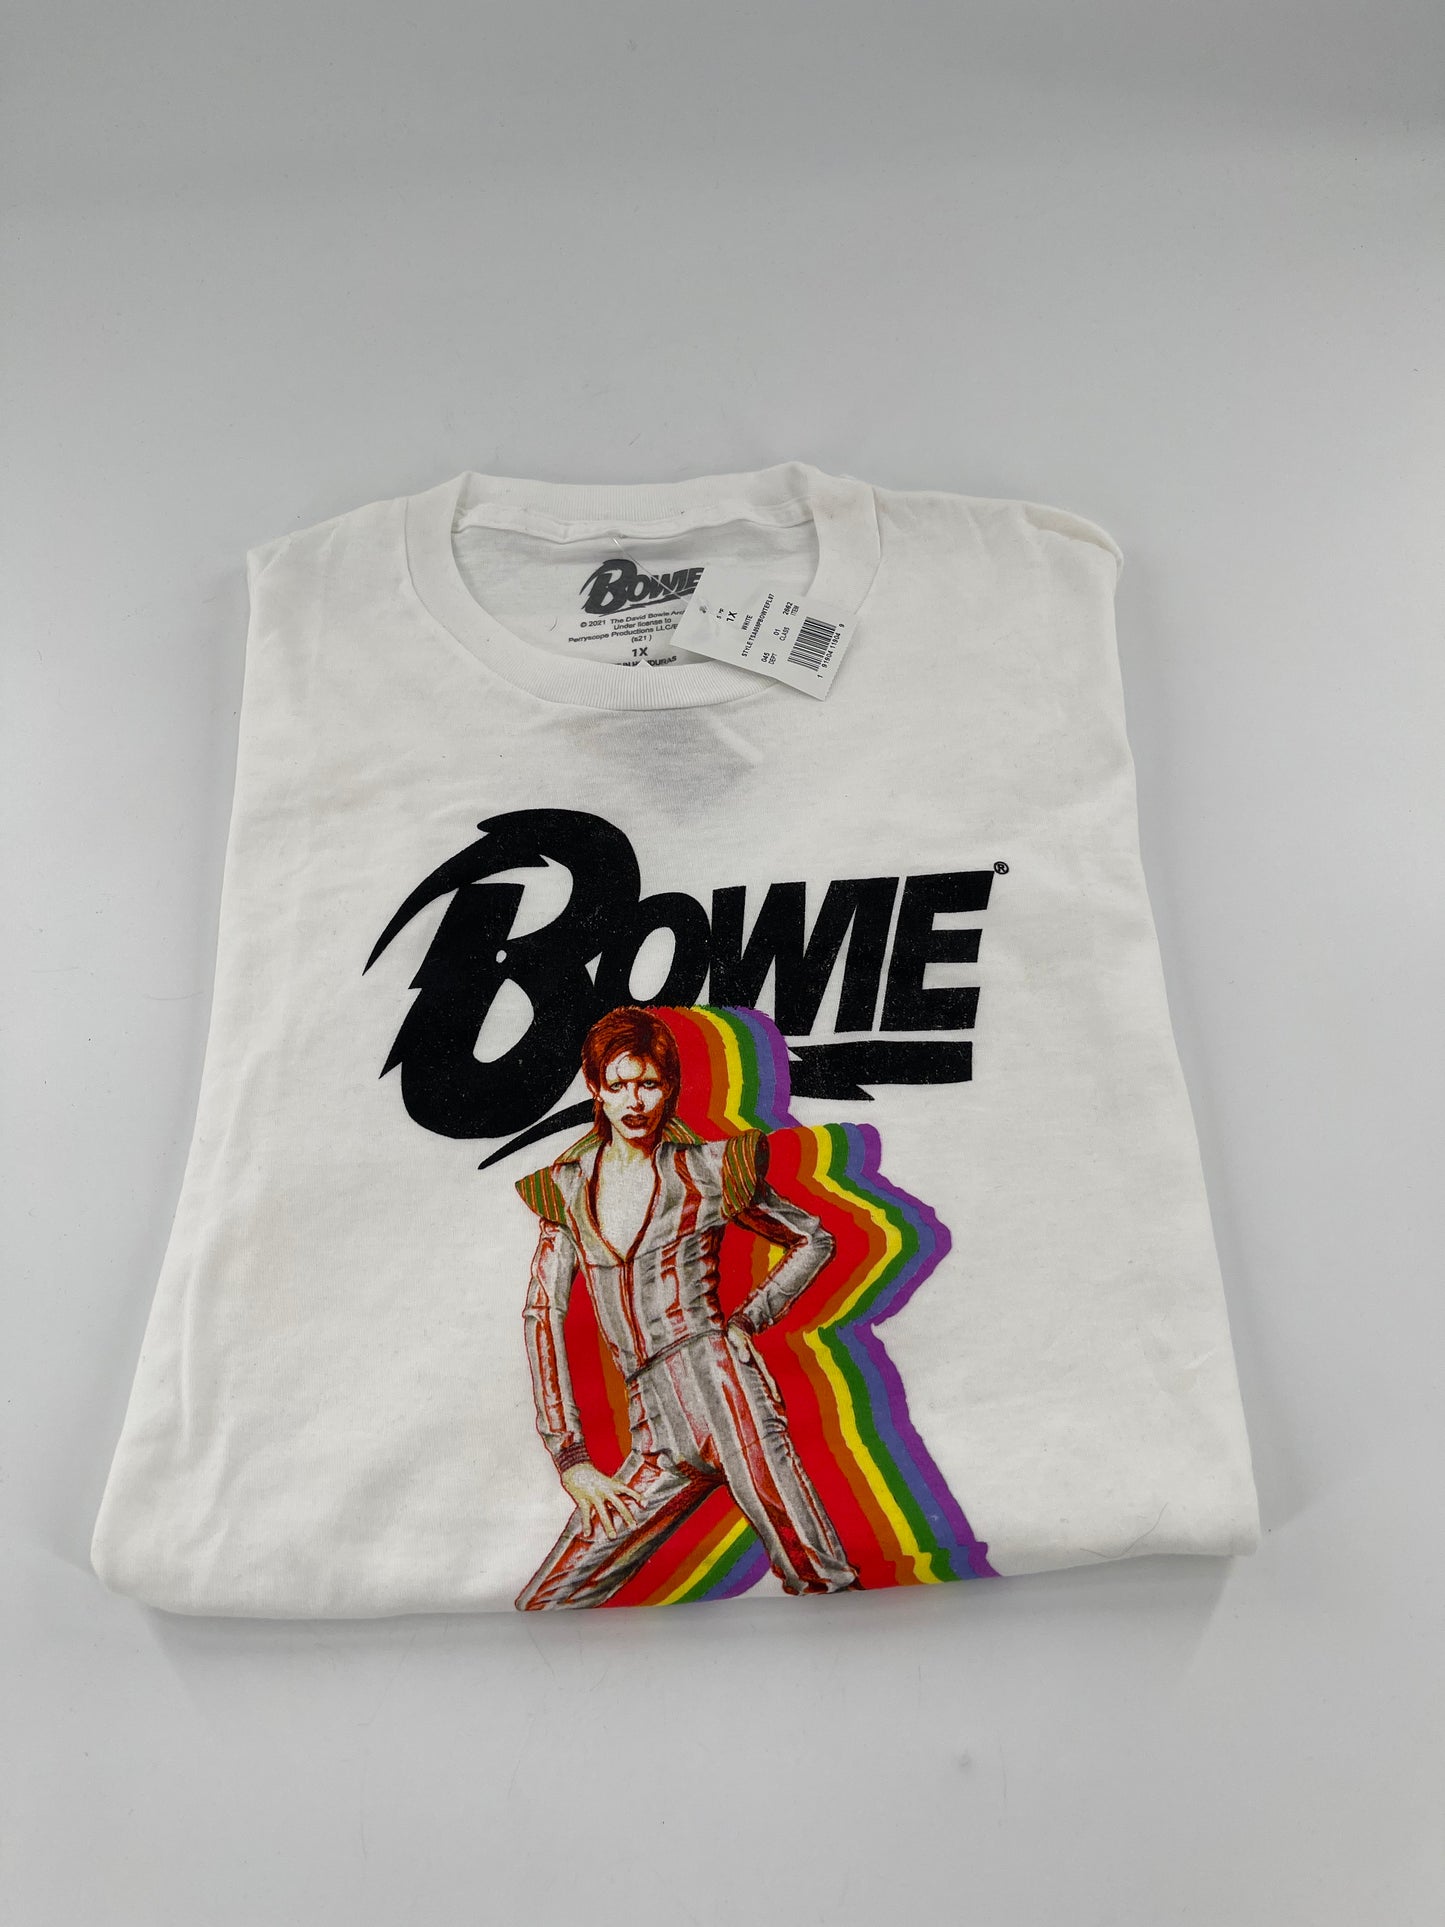 Bowie Band T (XL)